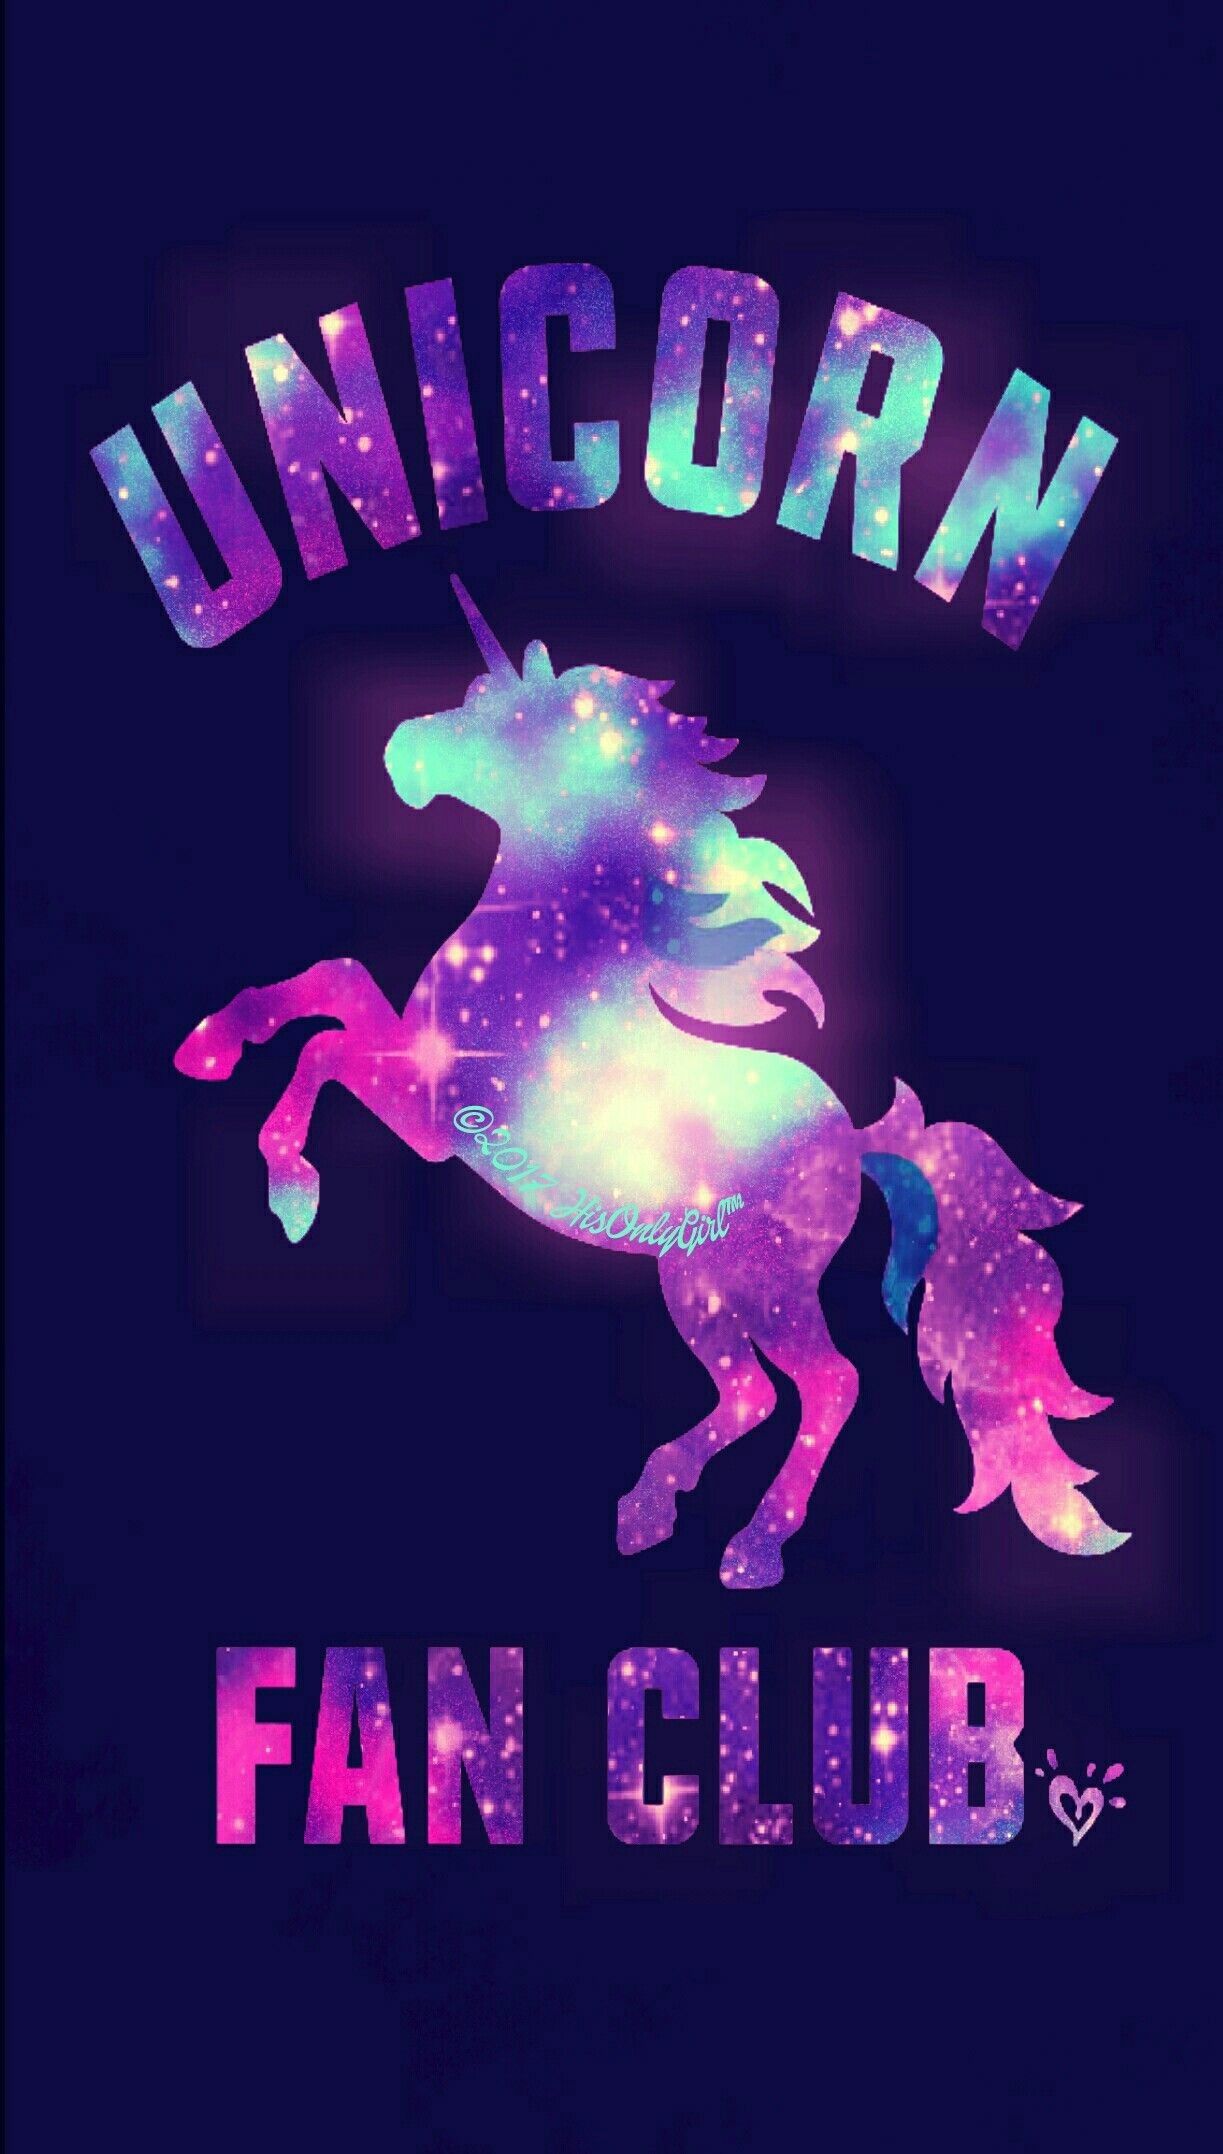 Galaxy Unicorns Wallpapers On Wallpaperdog Find this pin and more on phone wallpaper by paria hassanzadeh. galaxy unicorns wallpapers on wallpaperdog